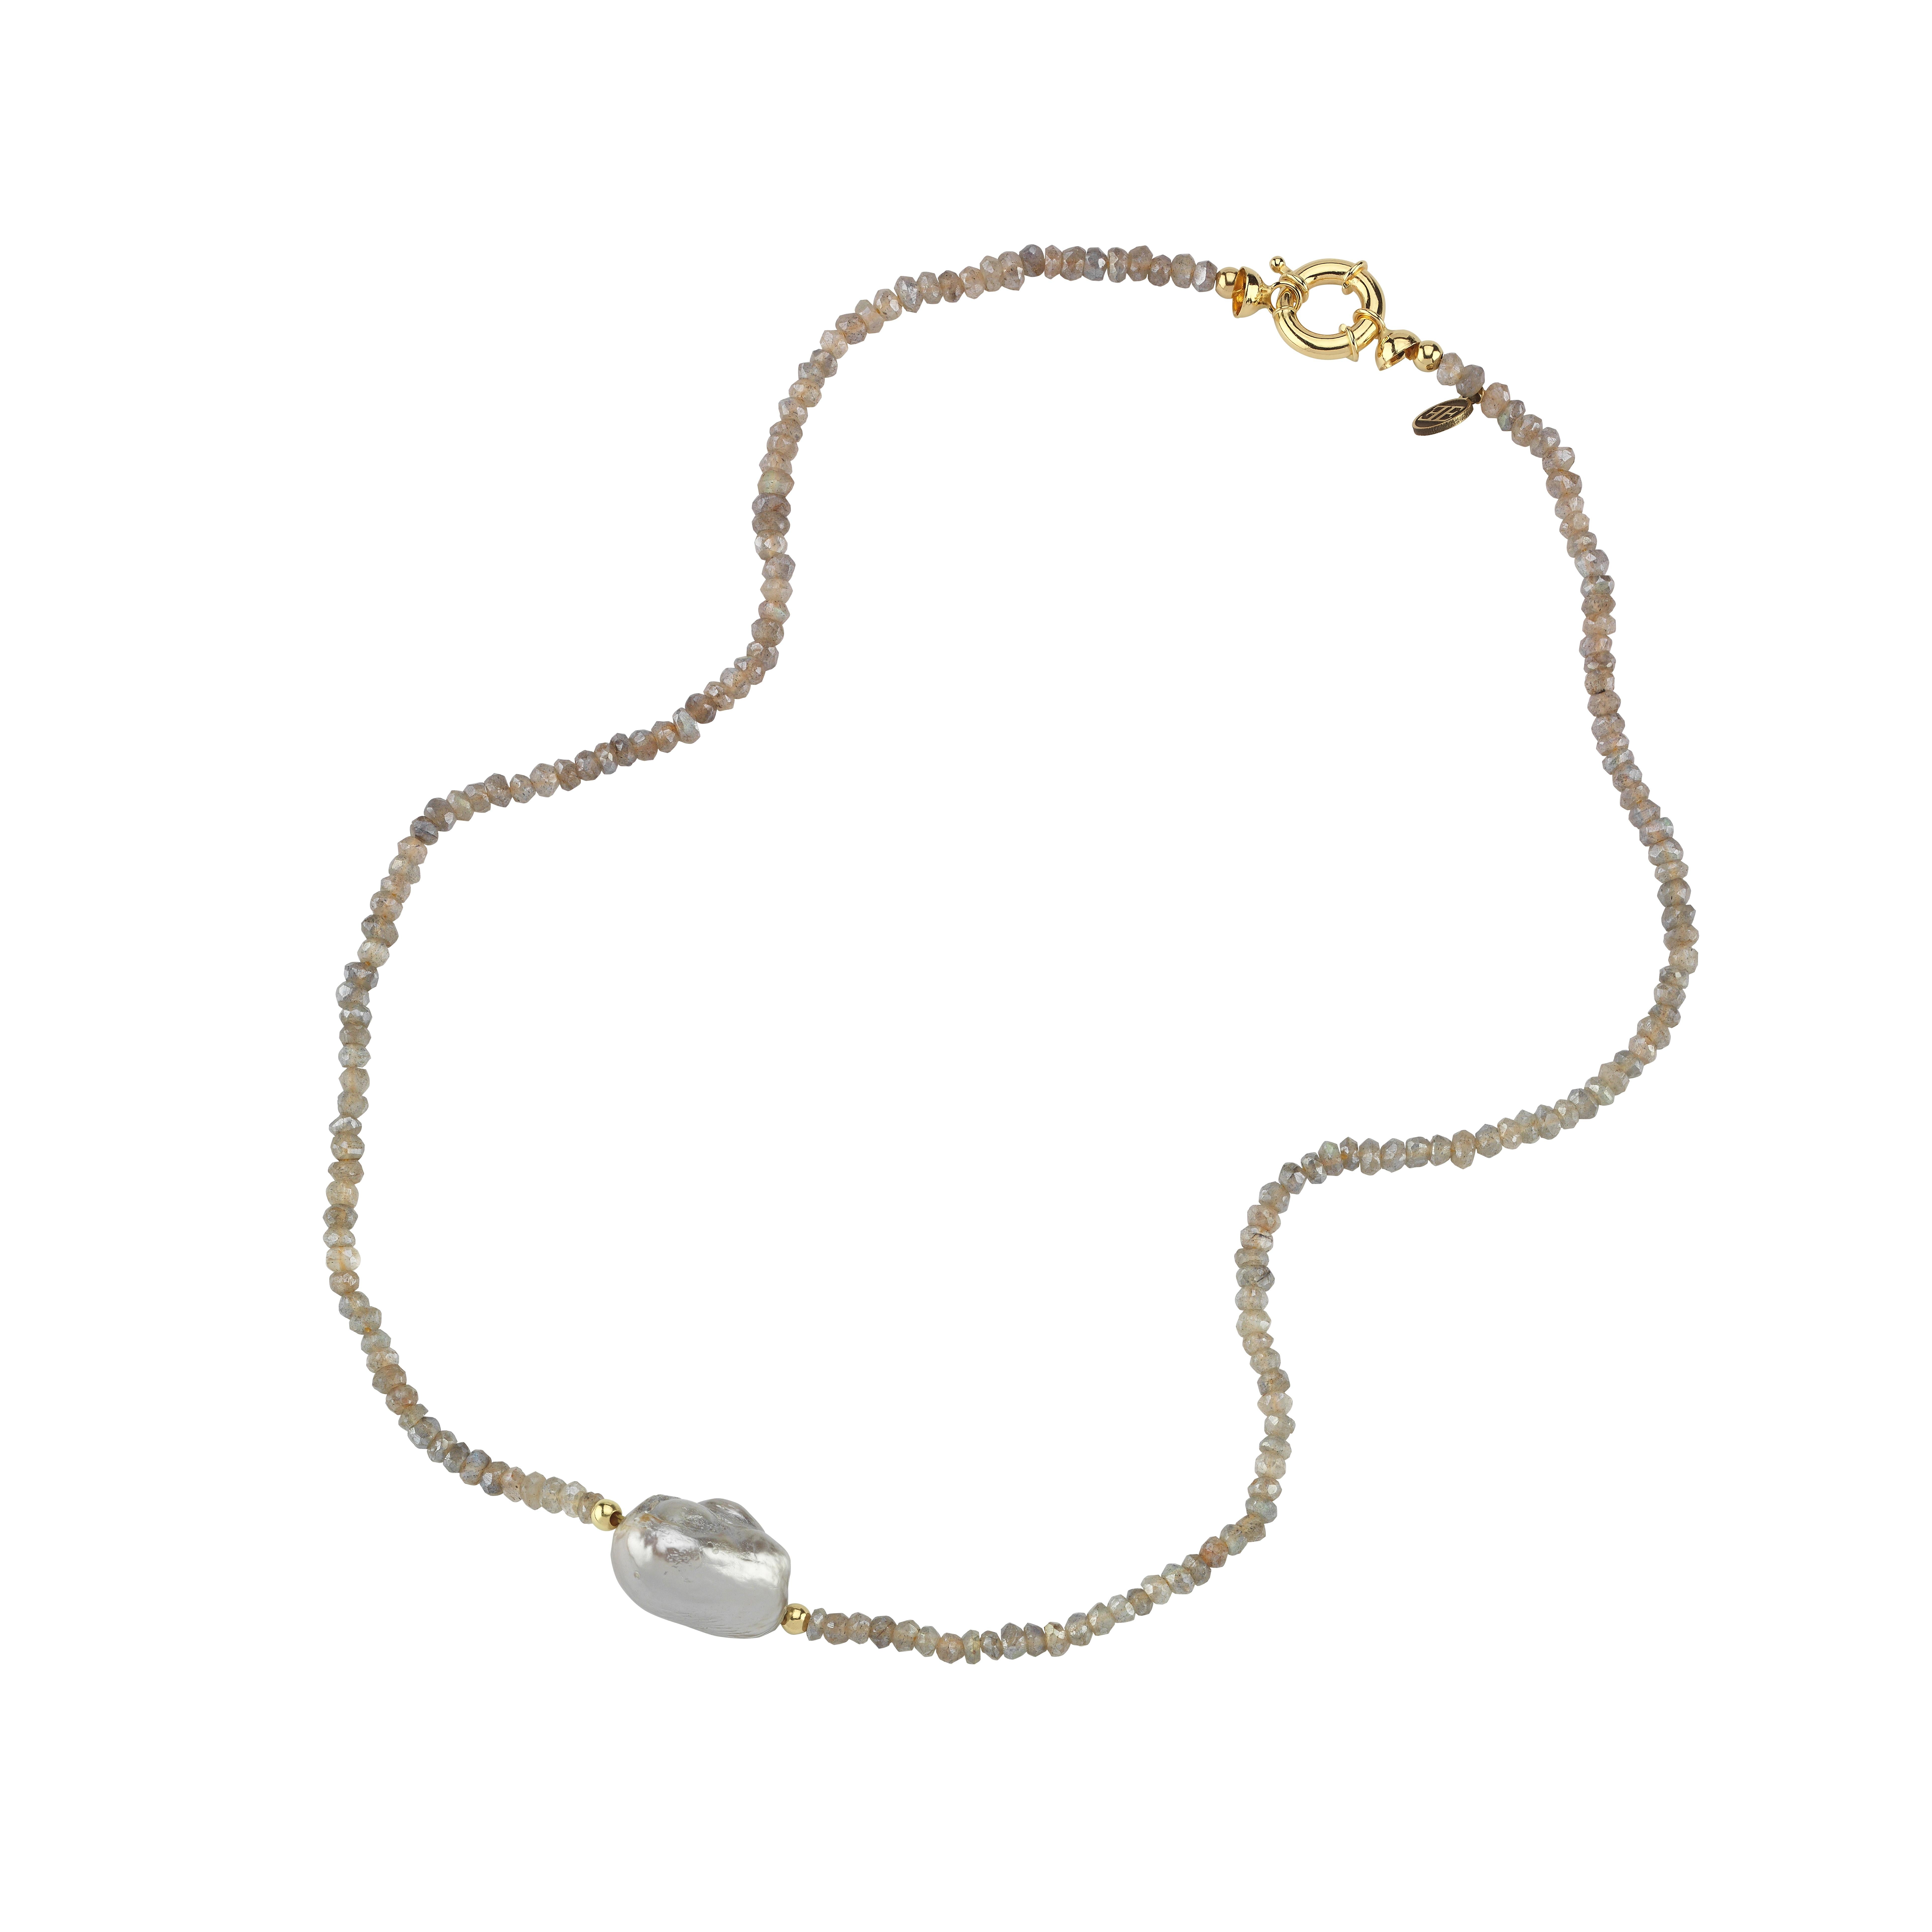 This necklace made with Baroque Gray Pearl and Labradorite stones and 1,4 g 14K Gold.